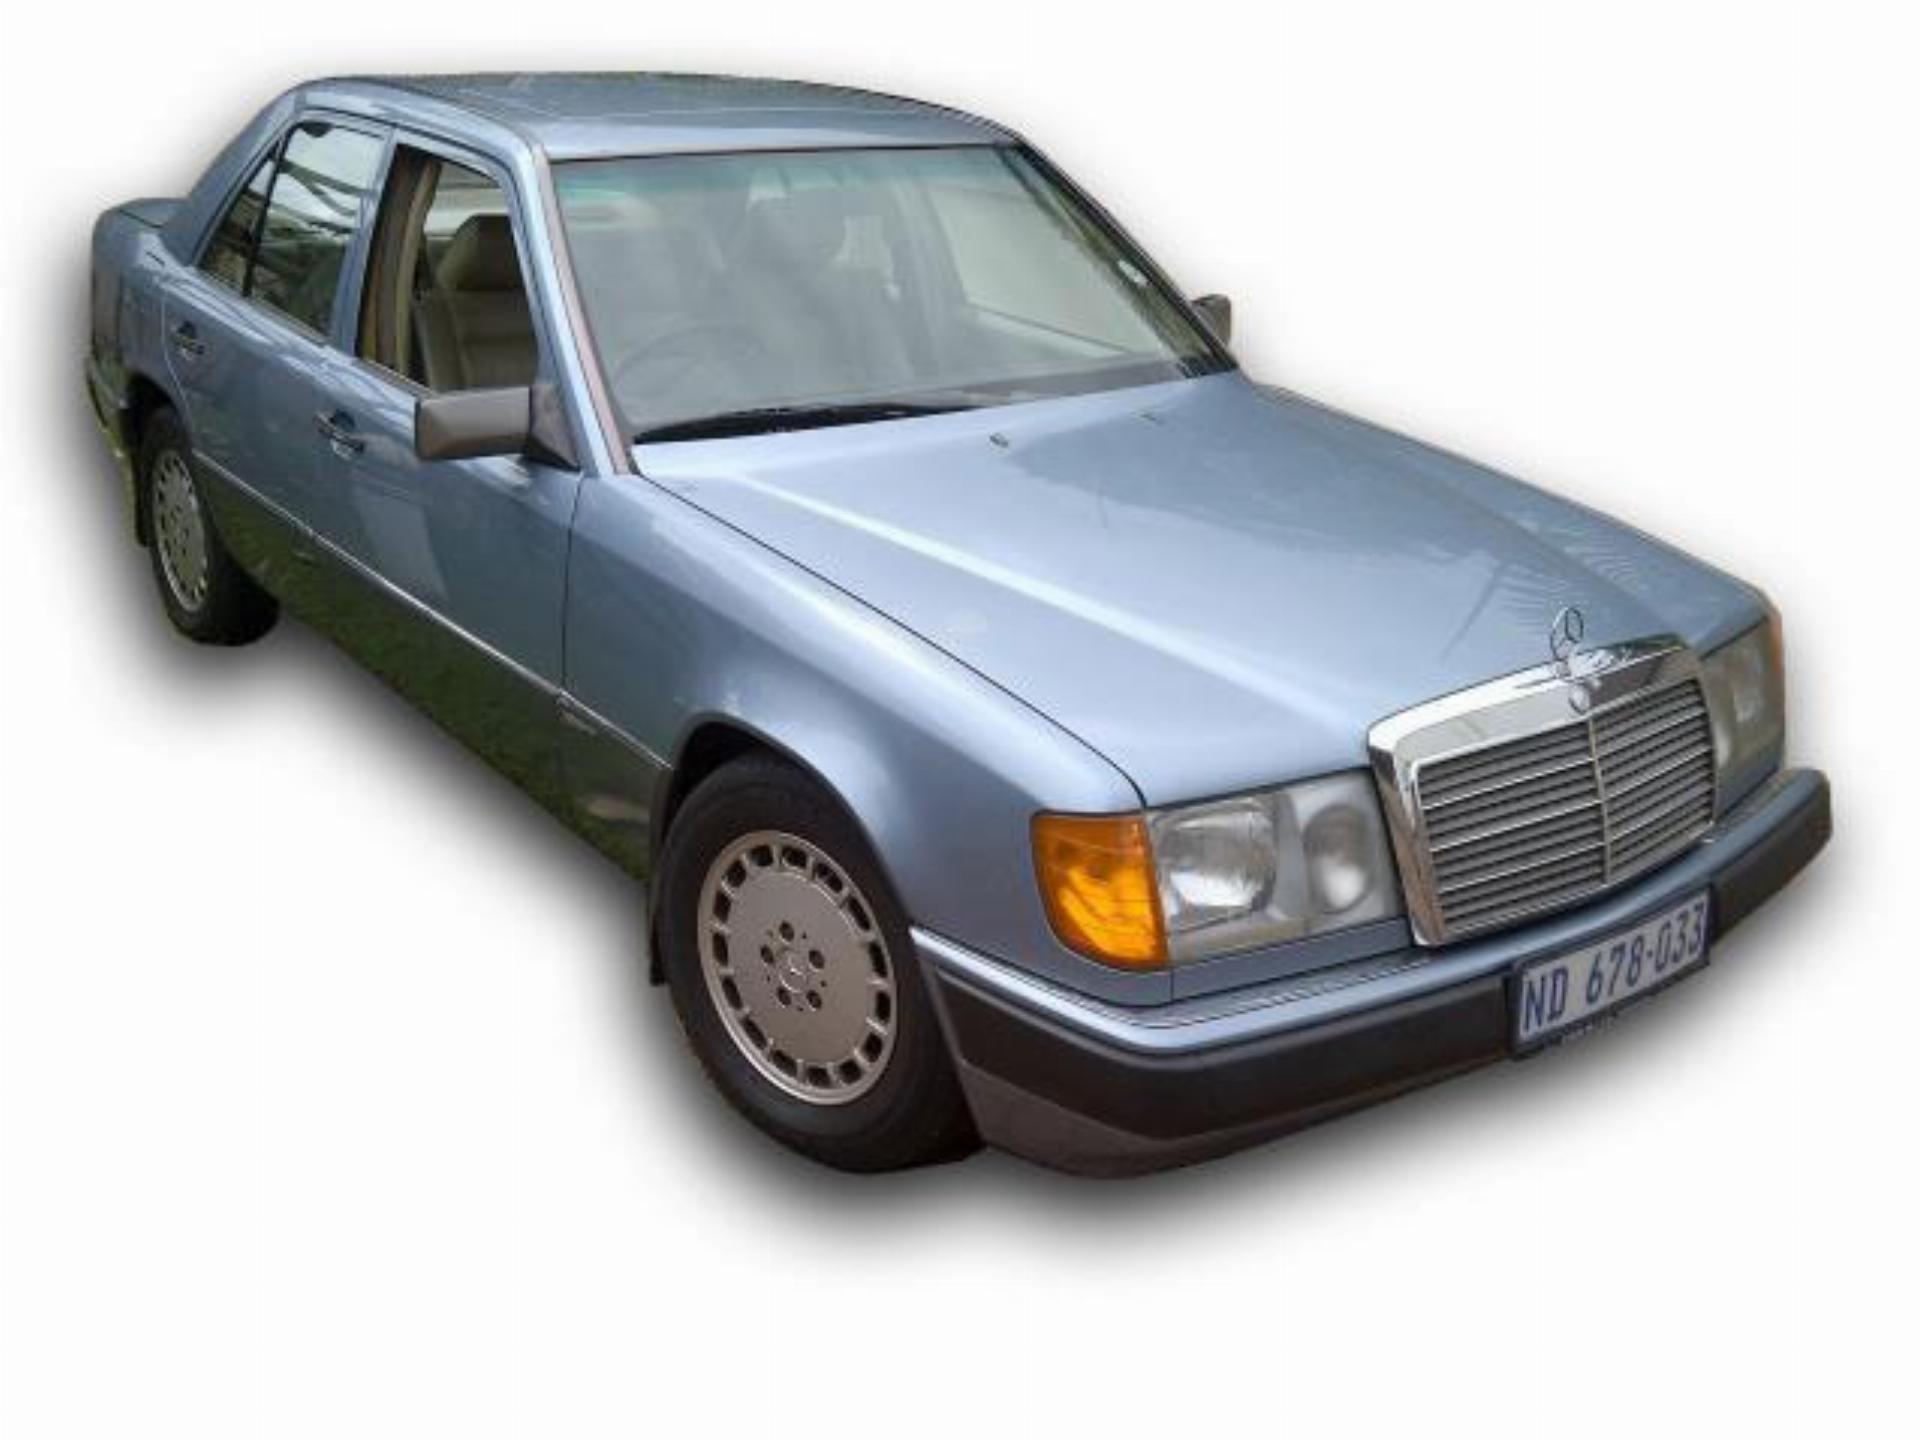 Used Mercedes Benz 230 E W124 Series 1991 on auction - PV1004204